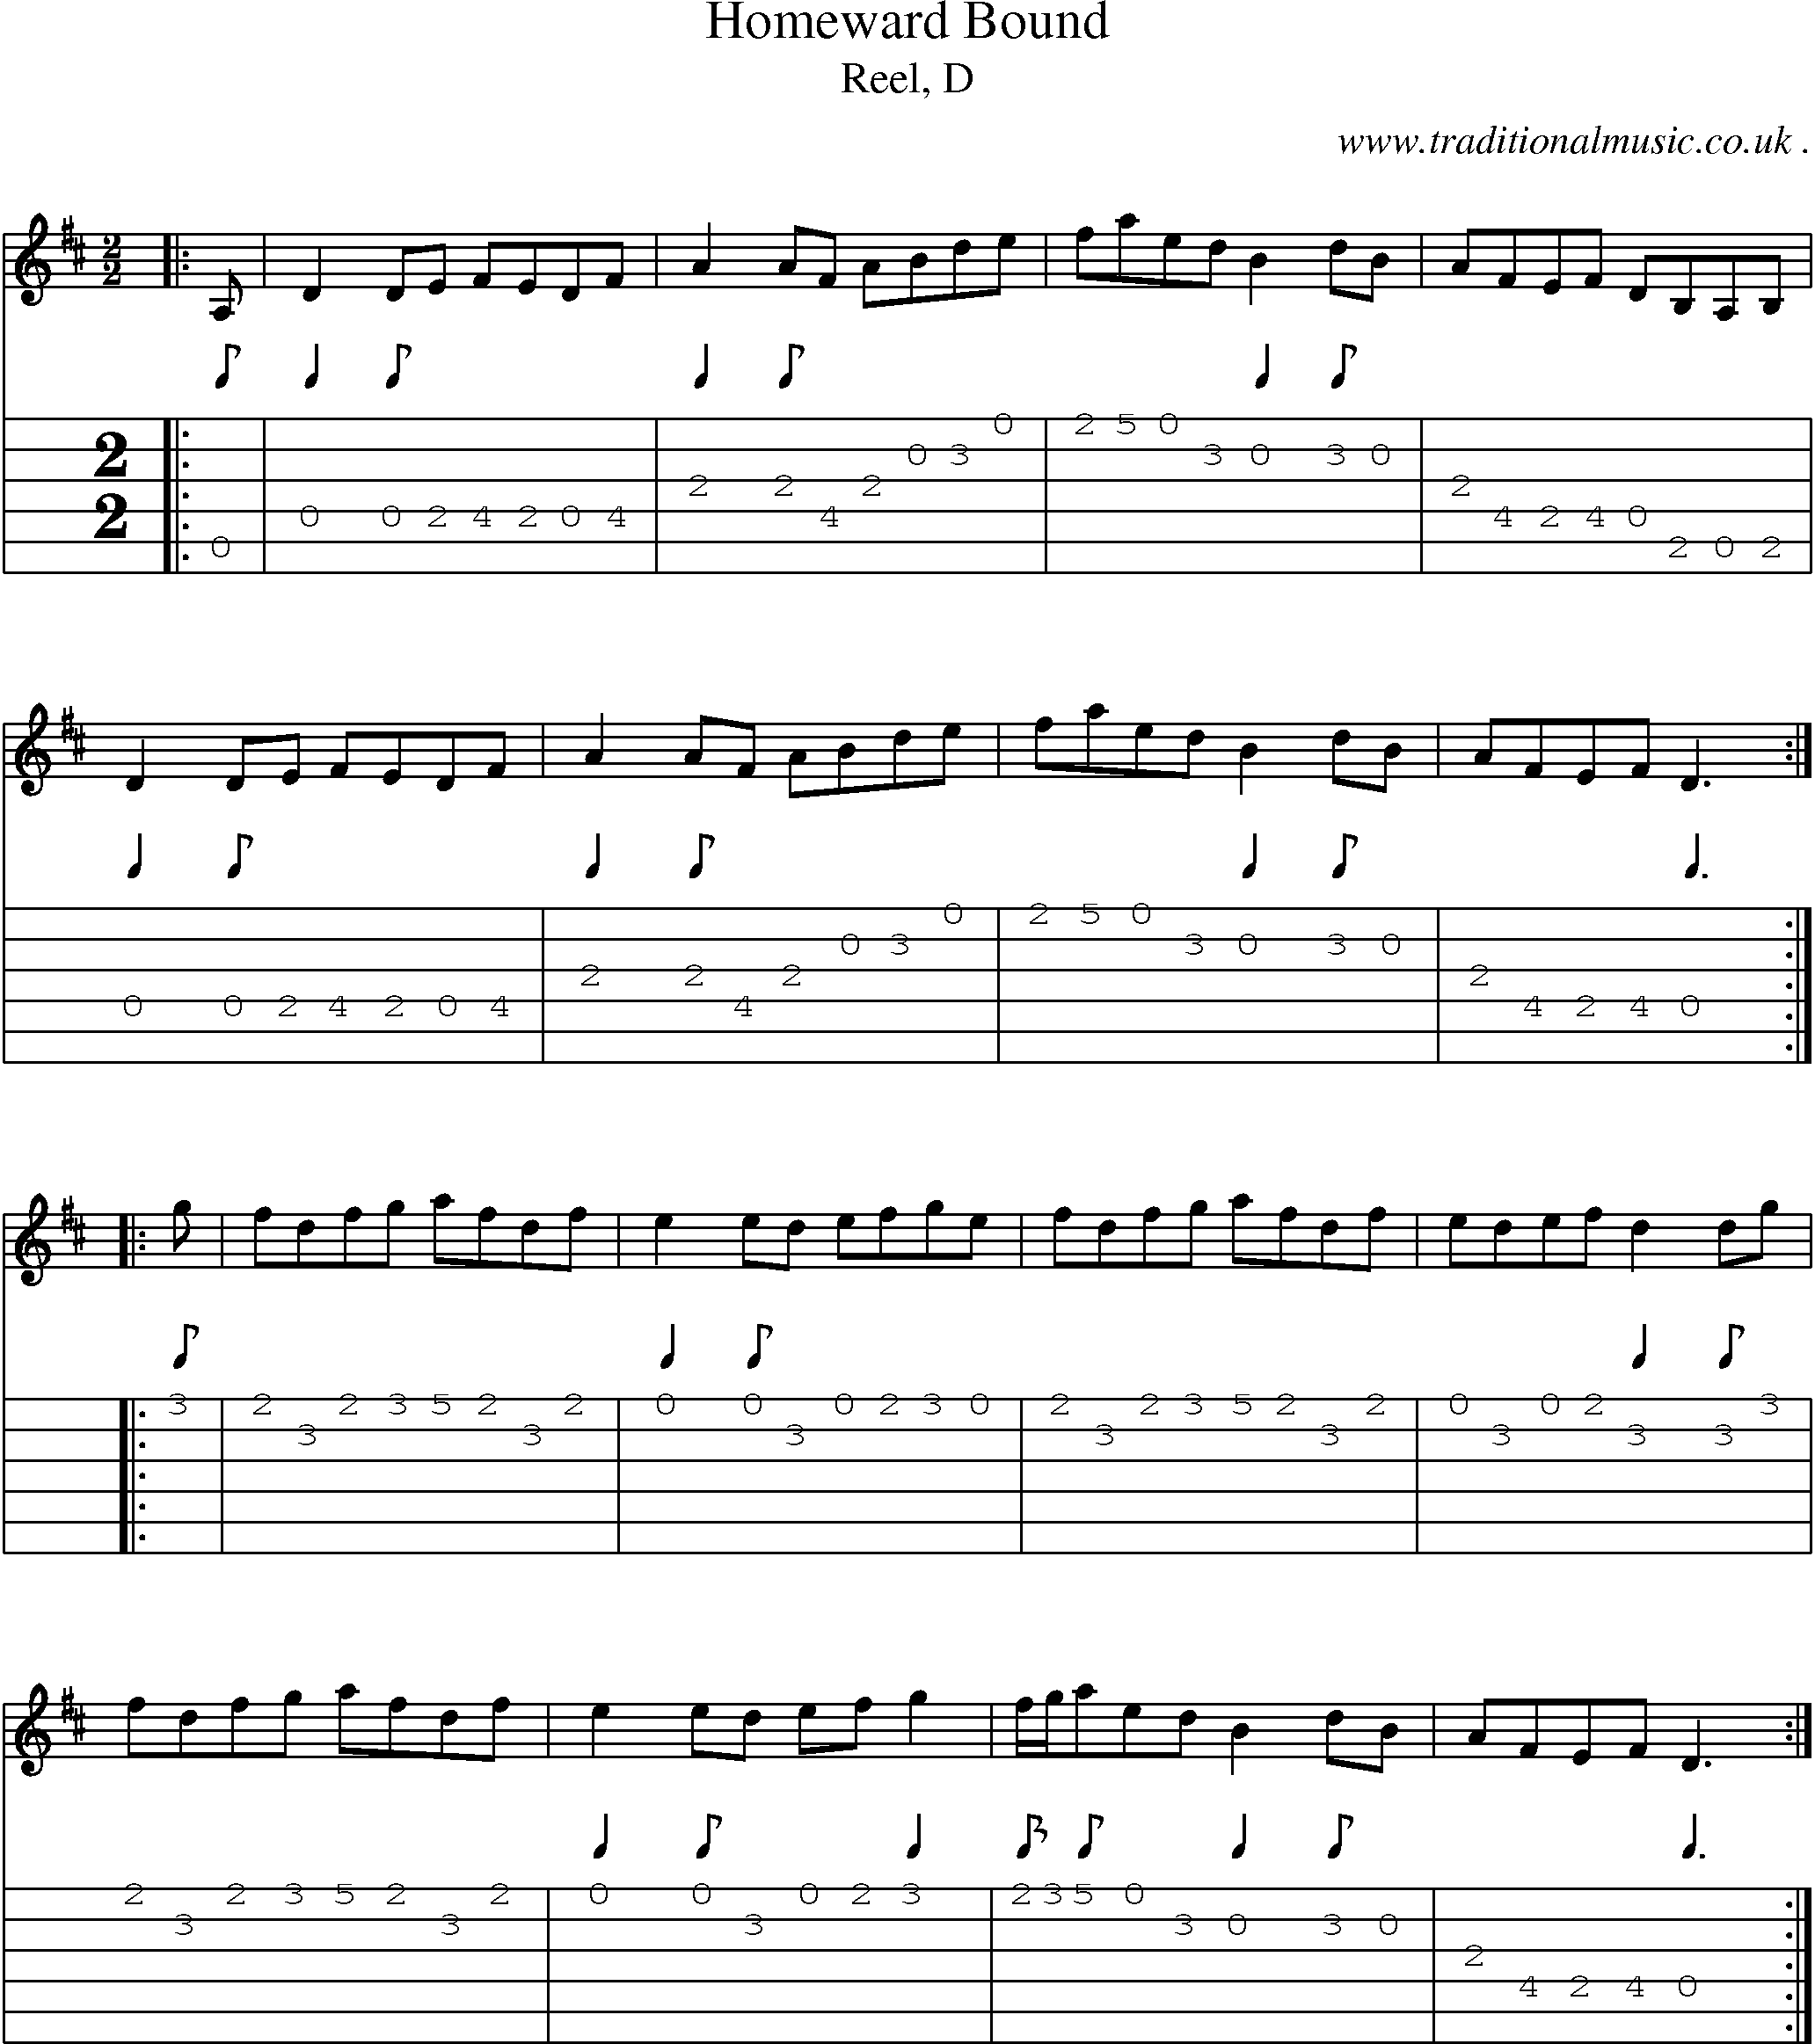 Sheet-music  score, Chords and Guitar Tabs for Homeward Bound